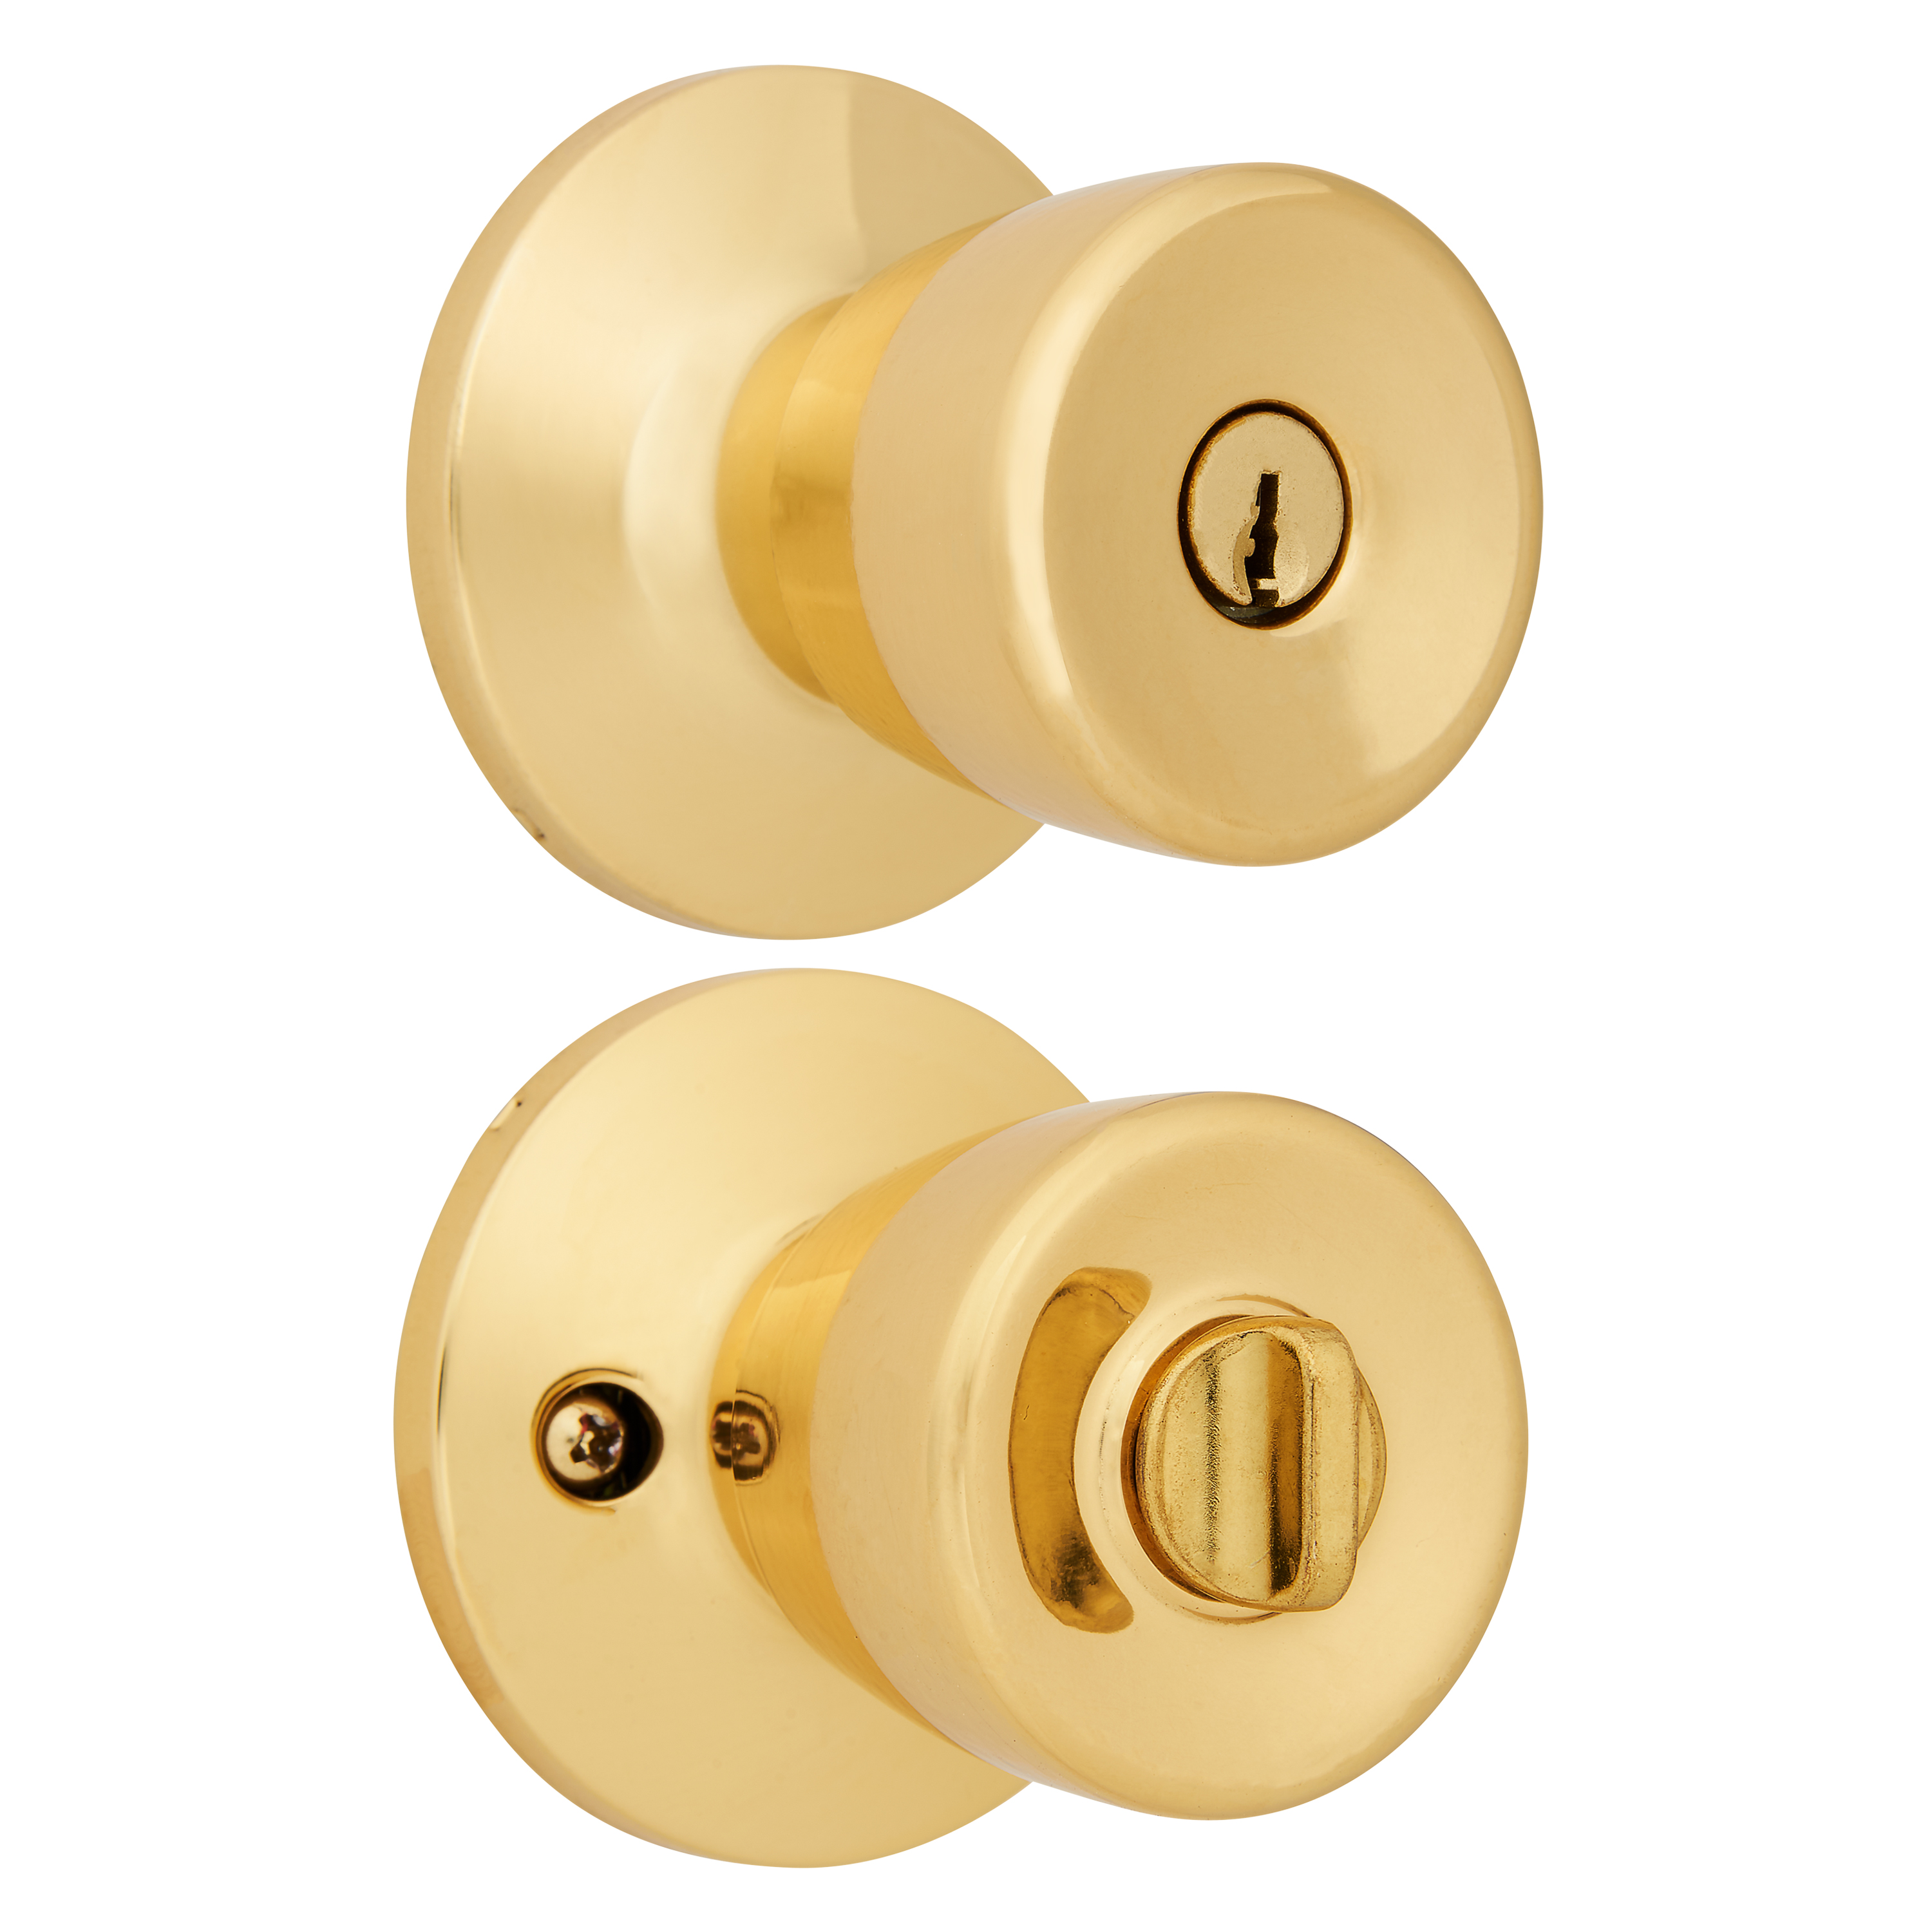 Brinks Keyed Entry Mobile Home Bell Style Doorknob, Polished Brass Finish - image 1 of 11